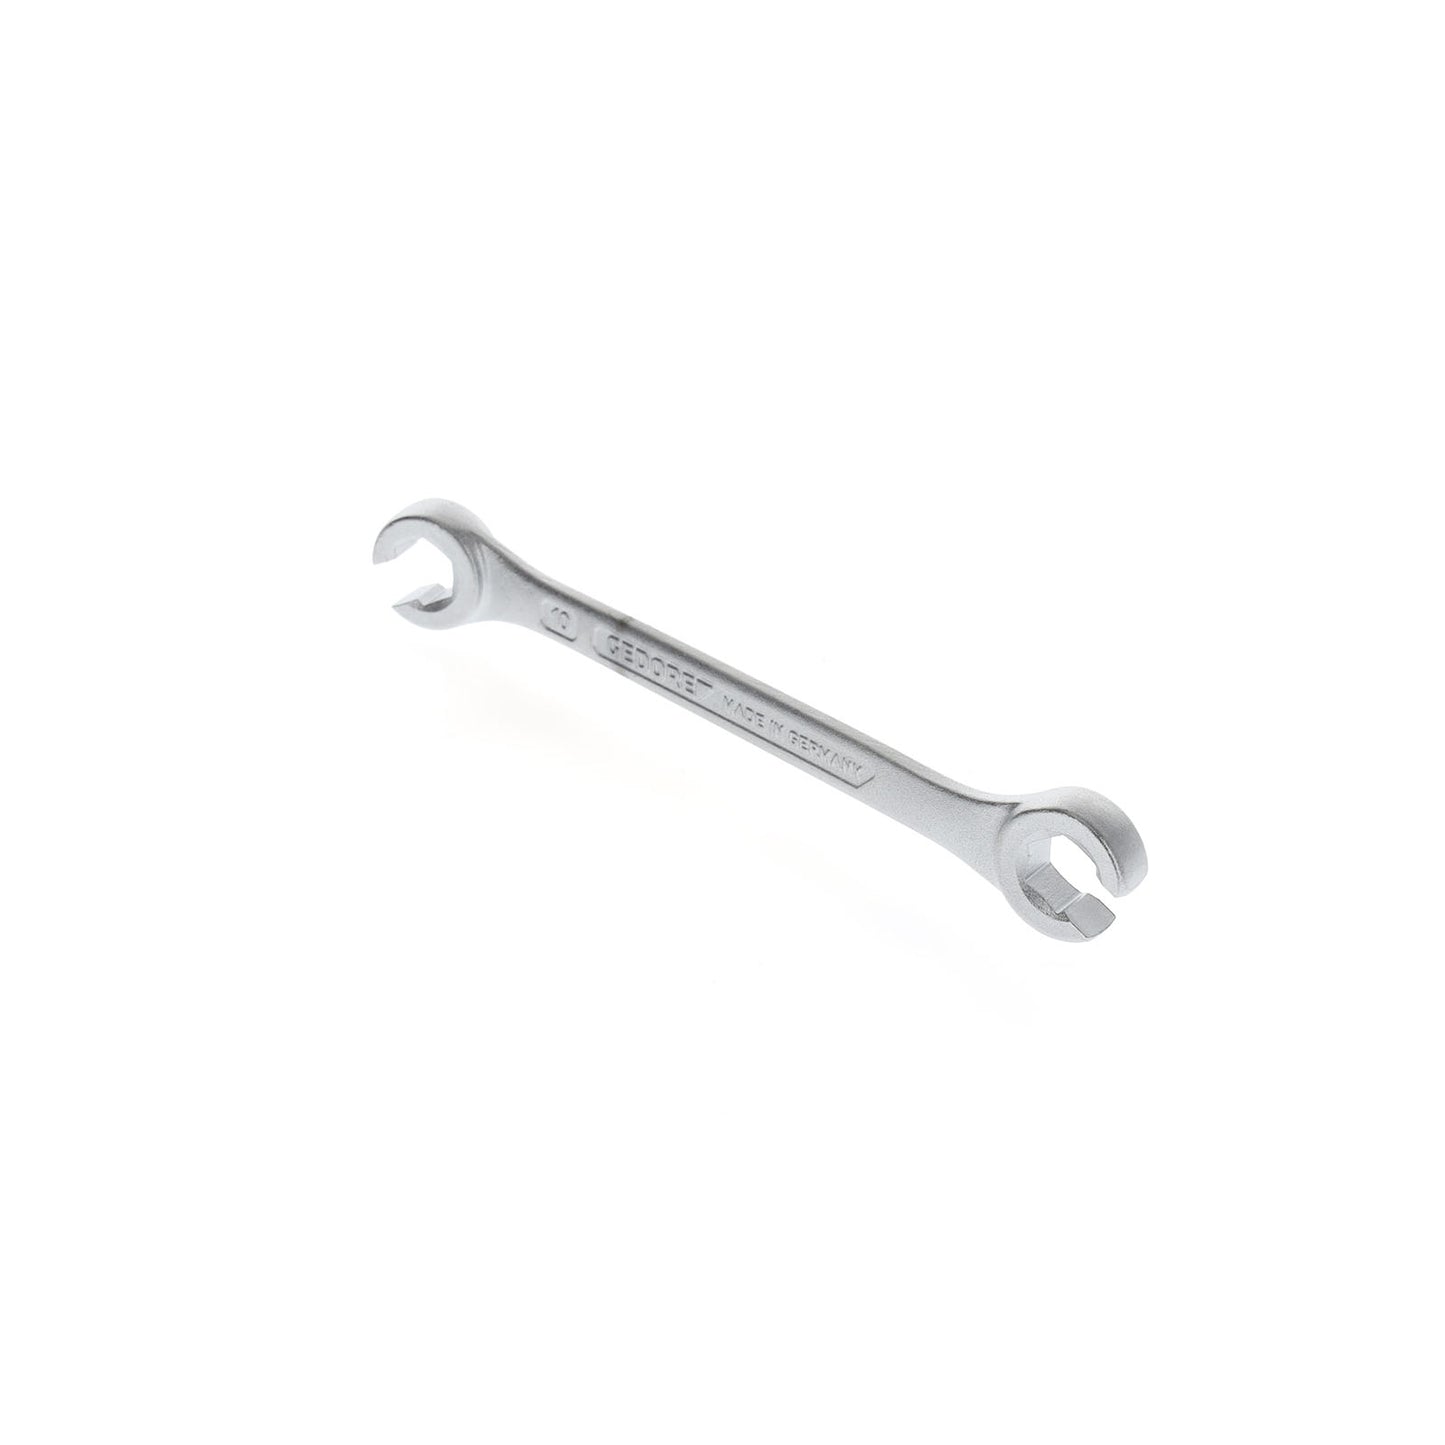 GEDORE 400 10X11 - Open Star Wrench, 10x11 (6057270)